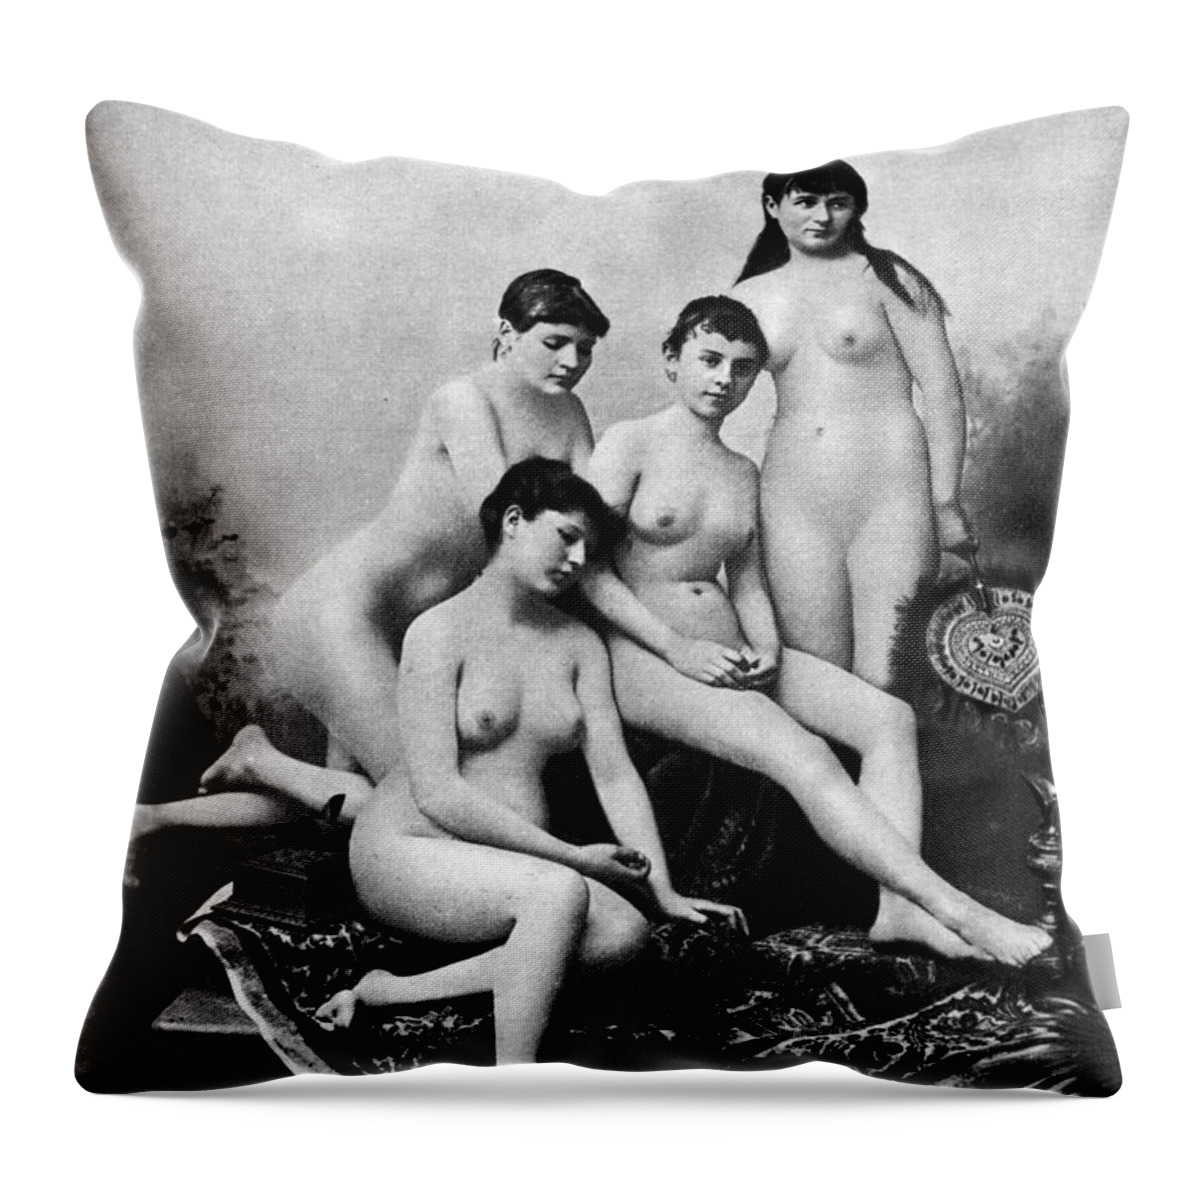 1889 Throw Pillow featuring the photograph Nude Group, 1889 by Granger